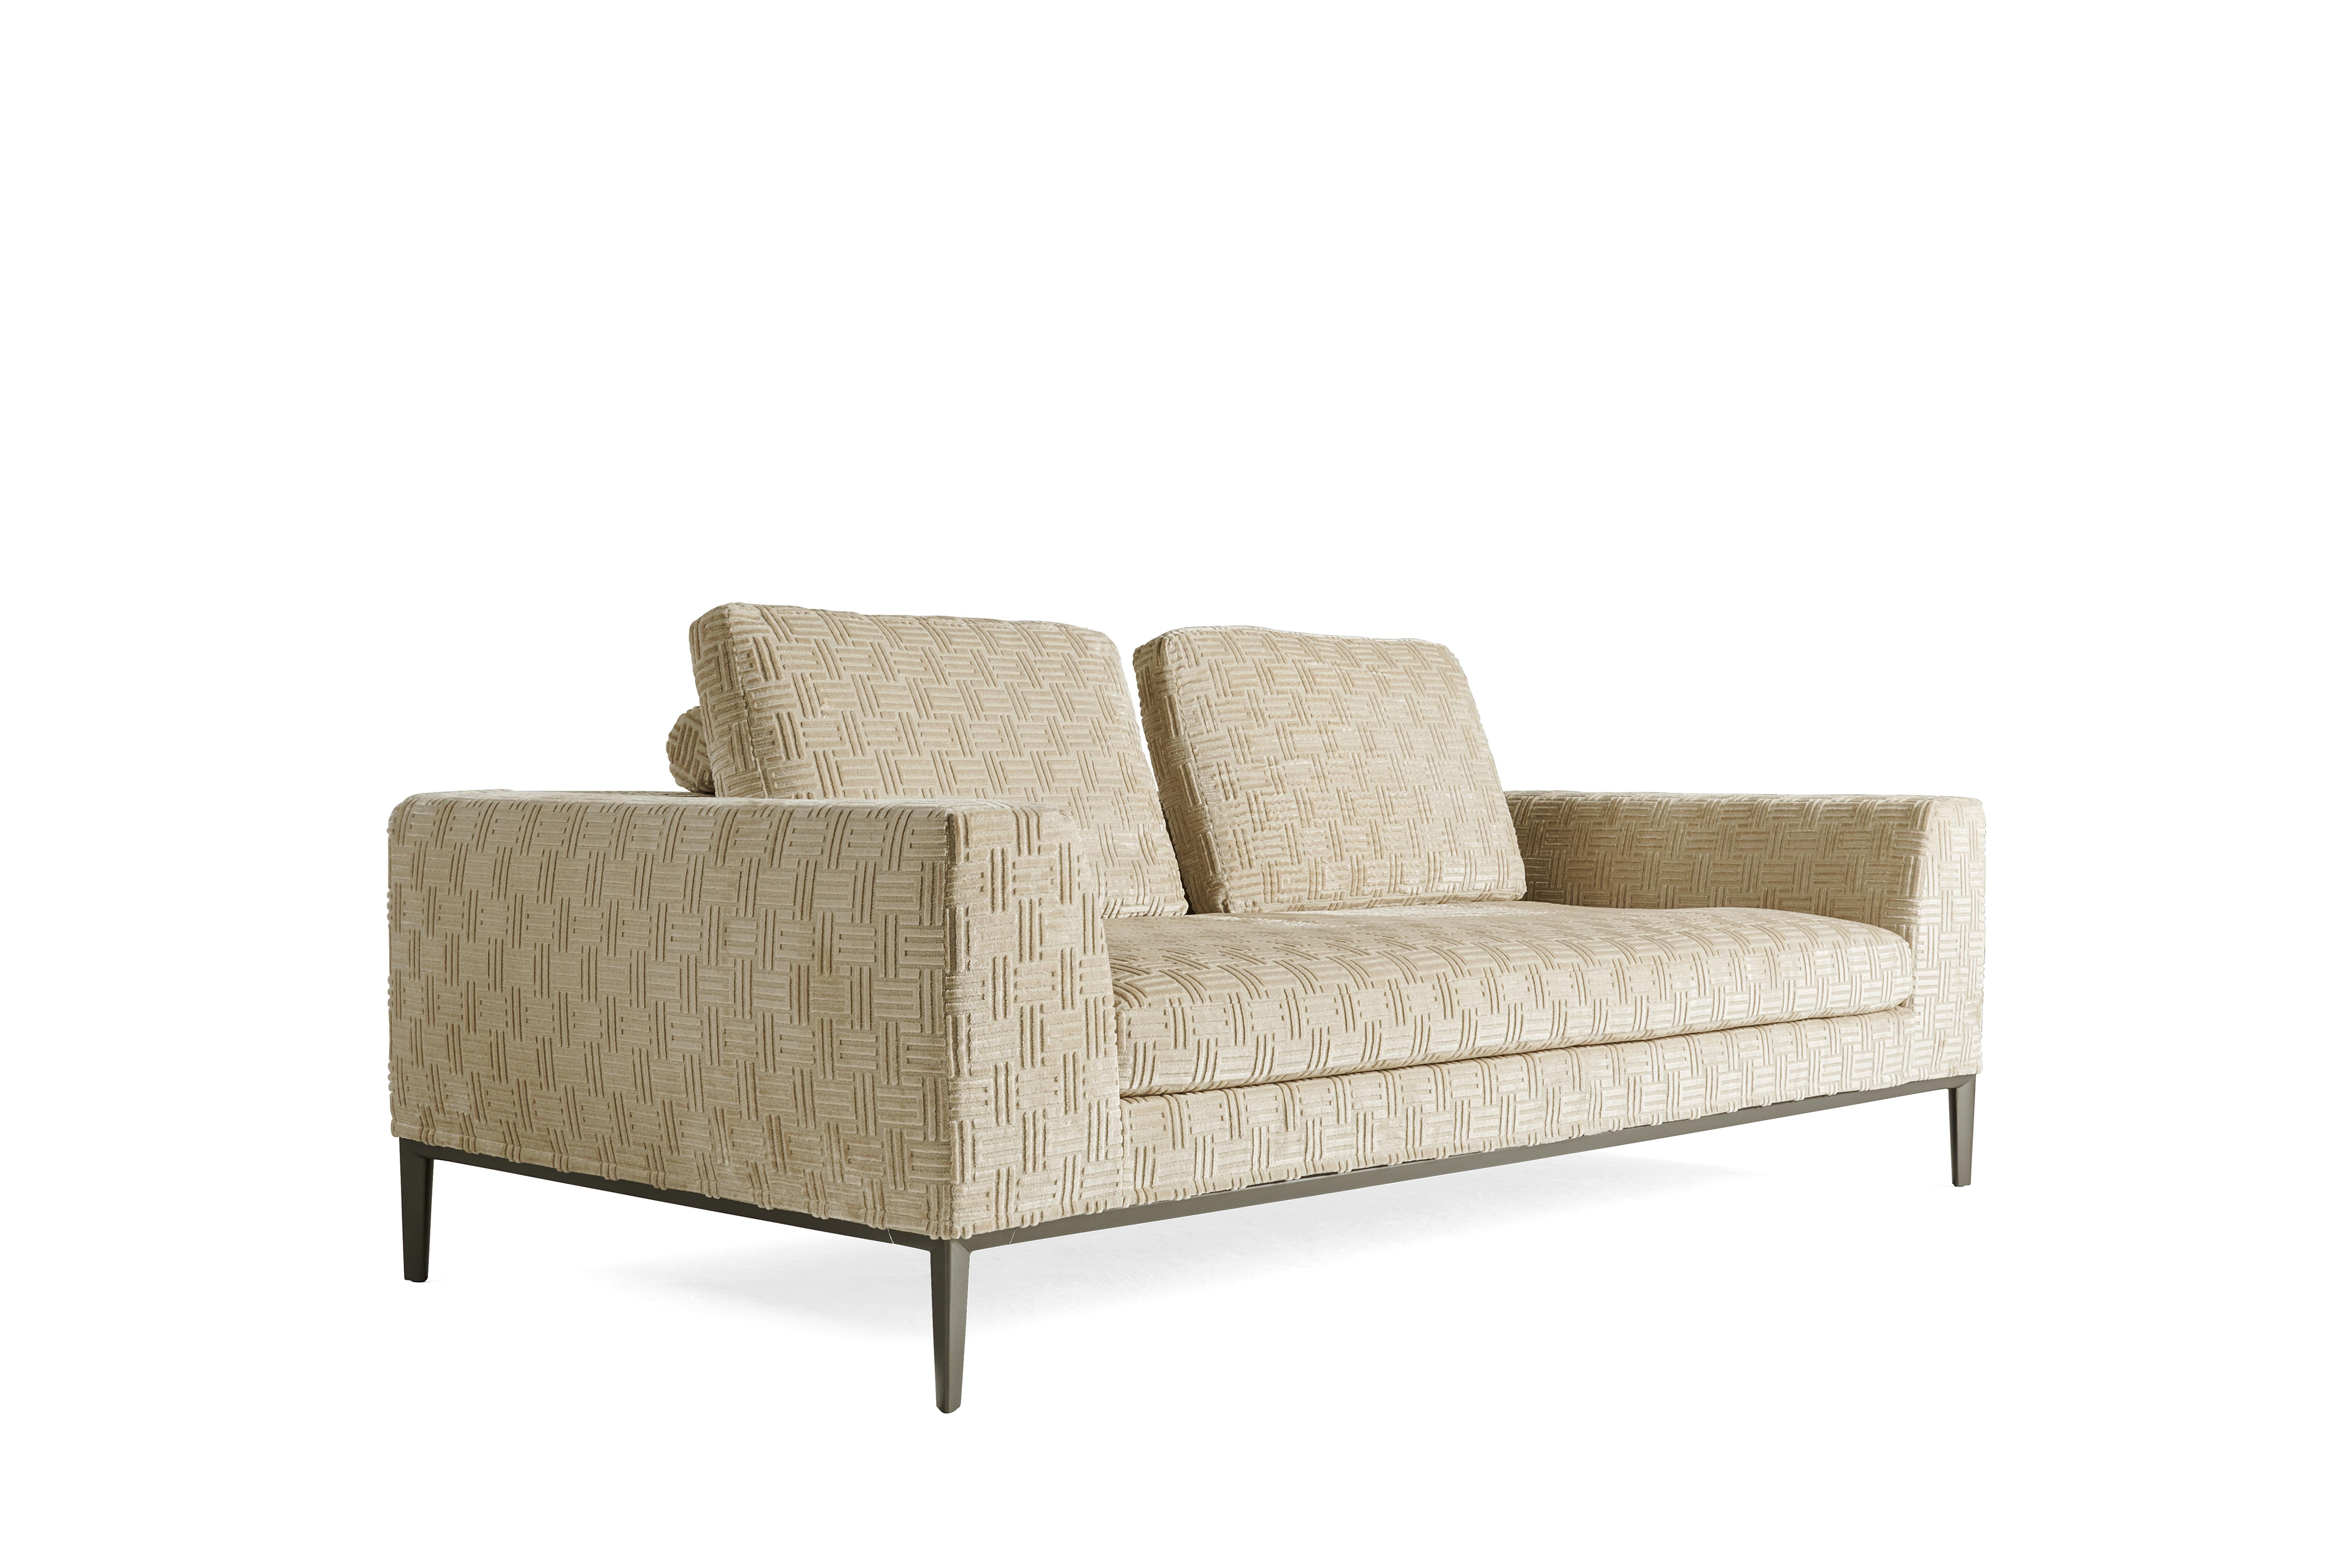 A modern and essential design for the Ease sofa. The presence of large cushions amplifies the feeling of comfort, while the possibility of adding storage elements, trays and small tables allows creating additional functional areas, transforming the